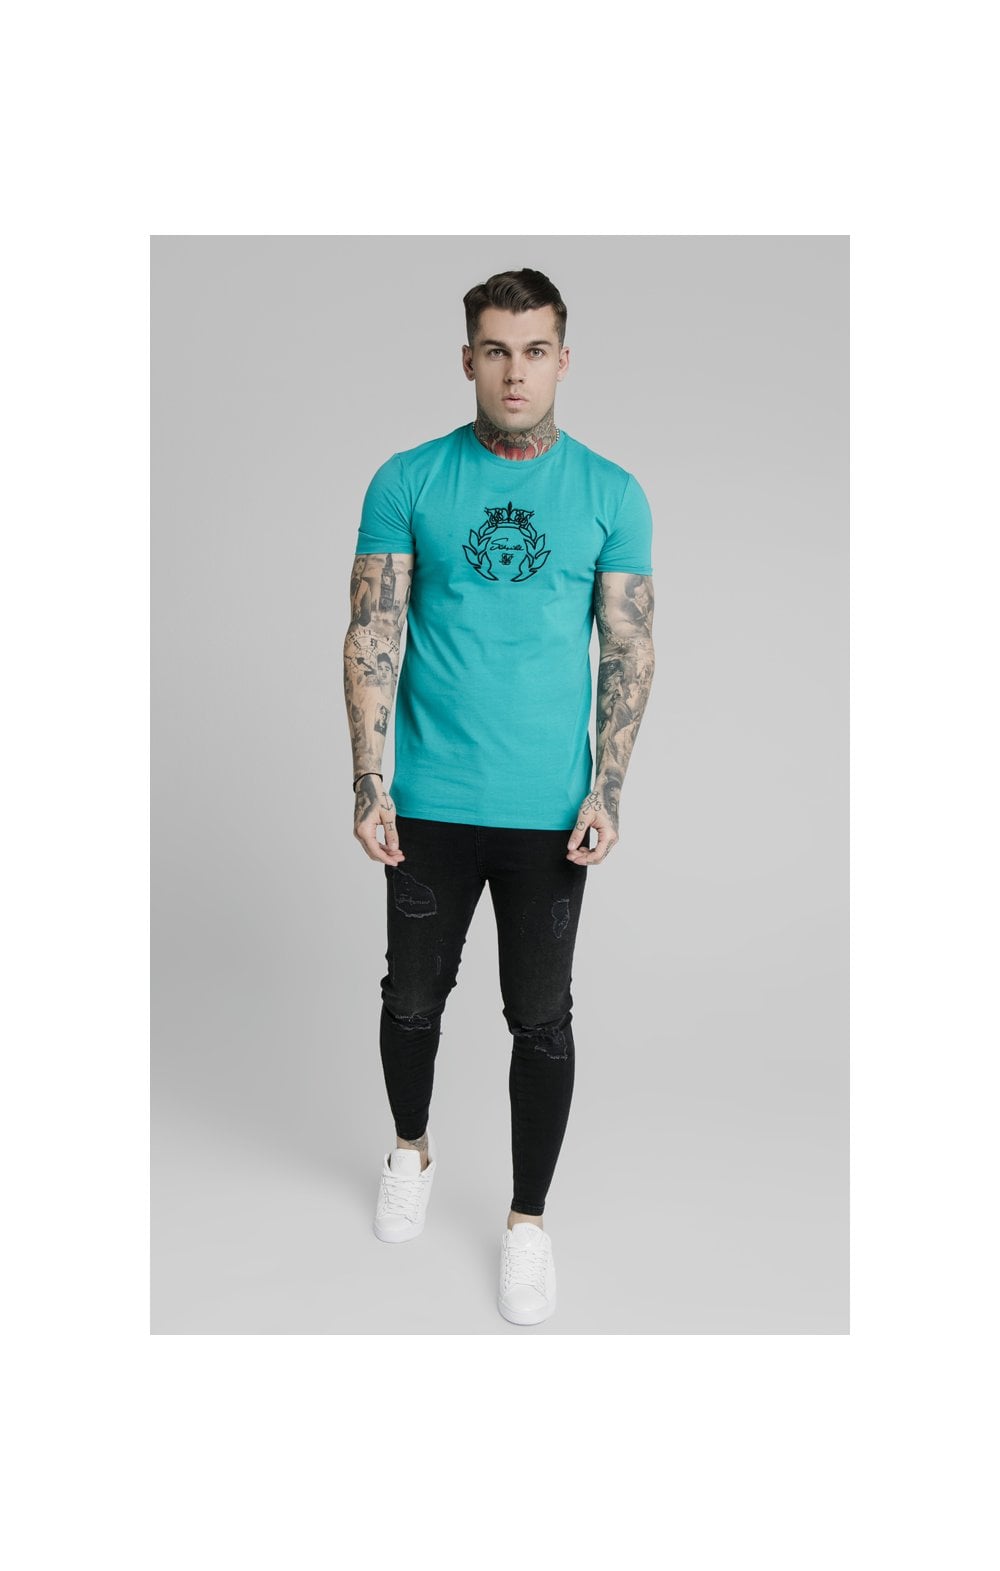 Load image into Gallery viewer, SikSilk S/S Azure Prestige Gym Tee - Teal (2)